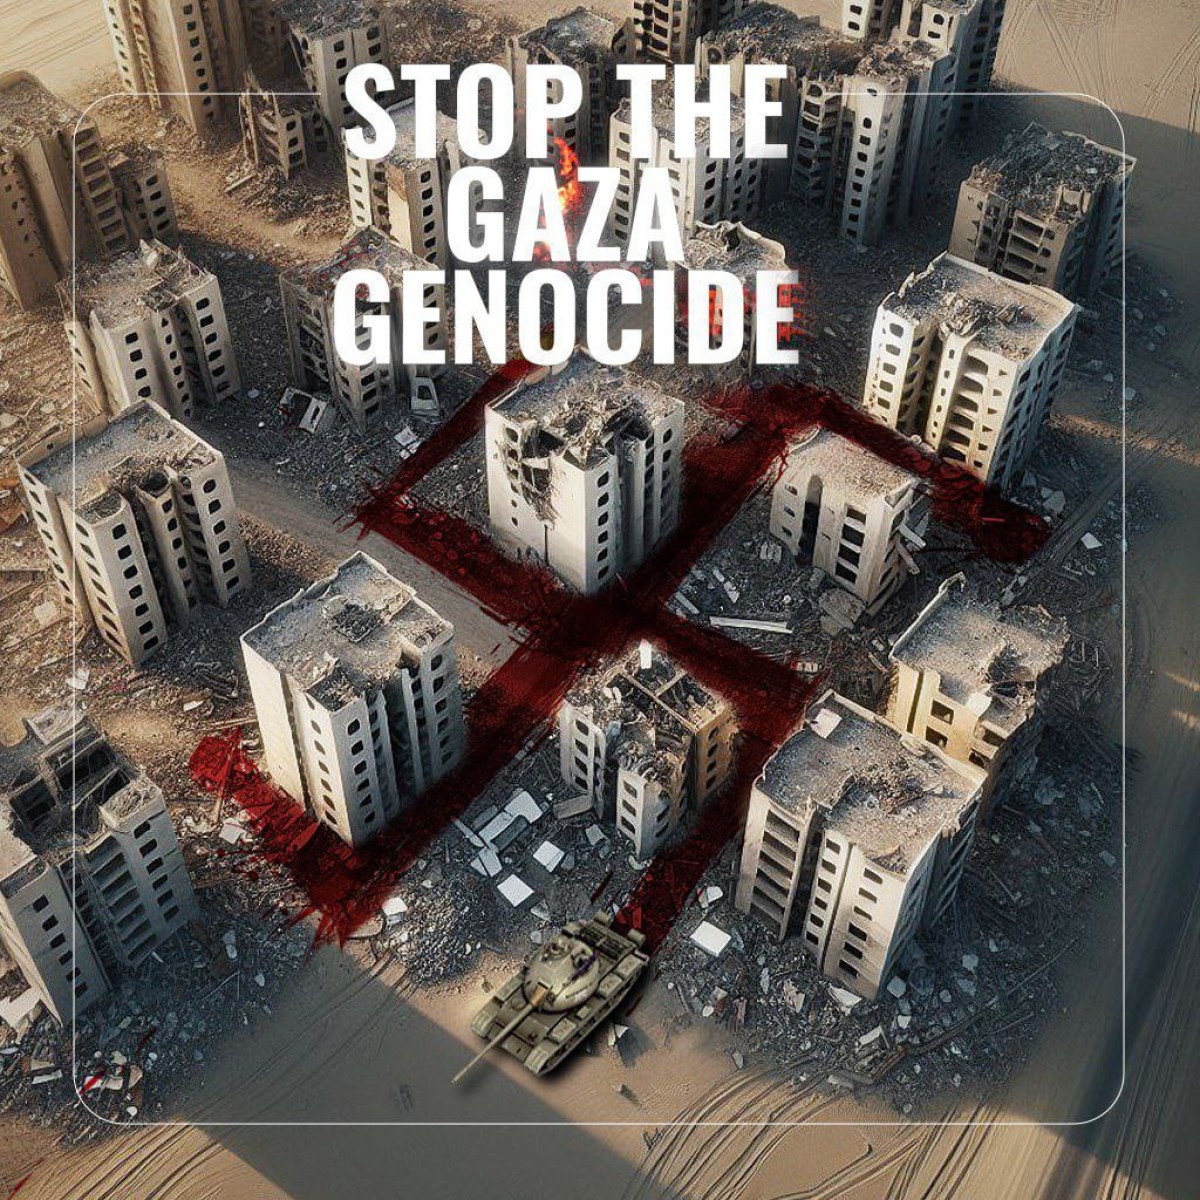 STOP THE GAZA GENOCIDE